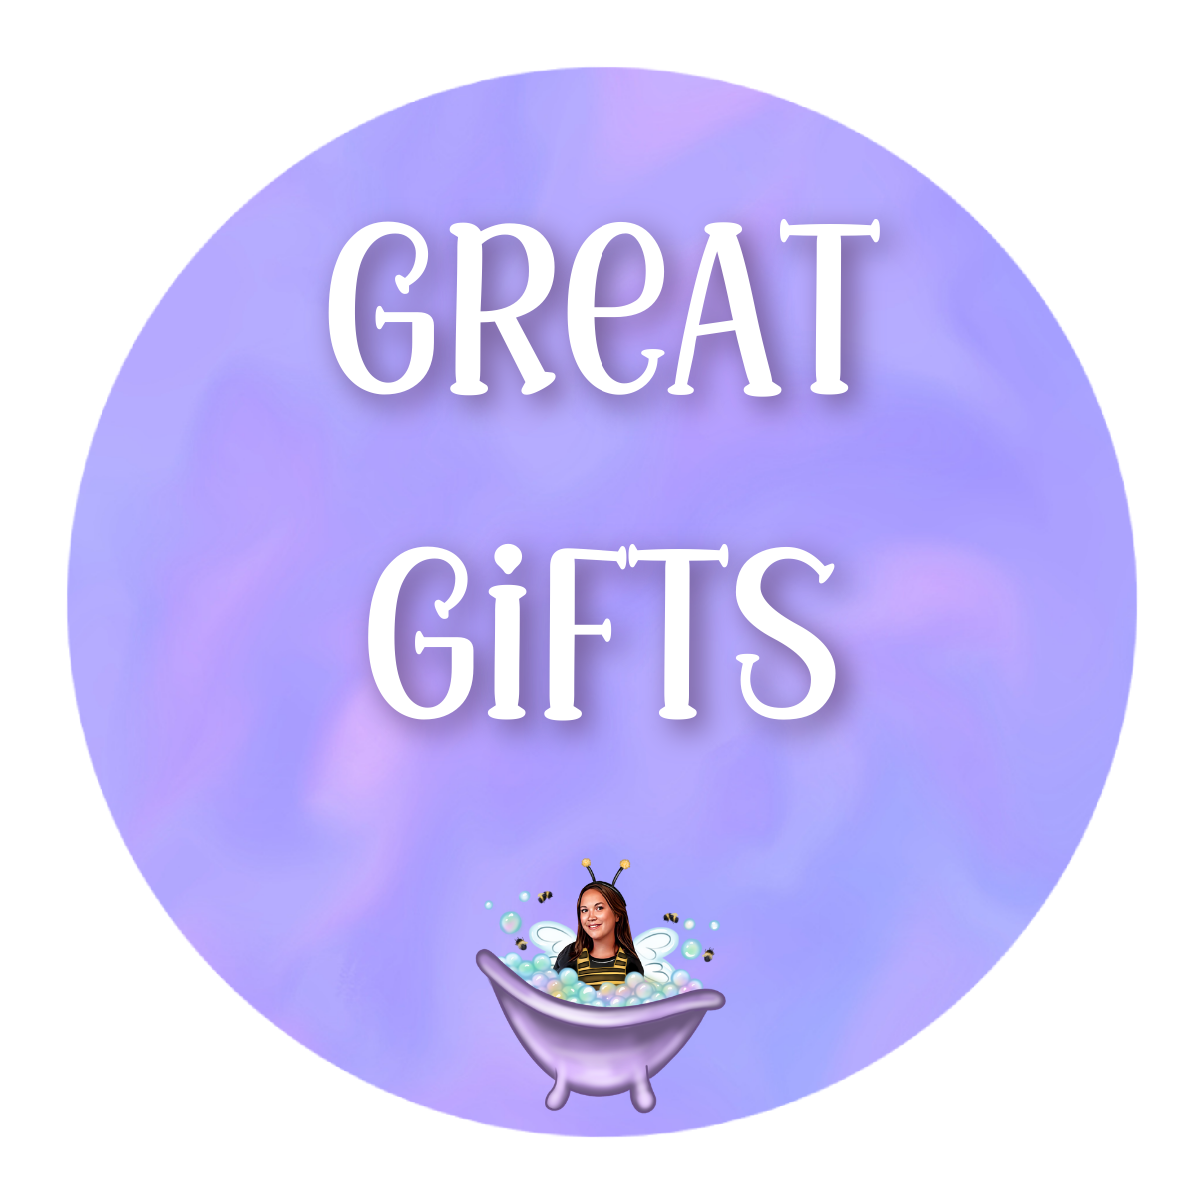 Great Gifts